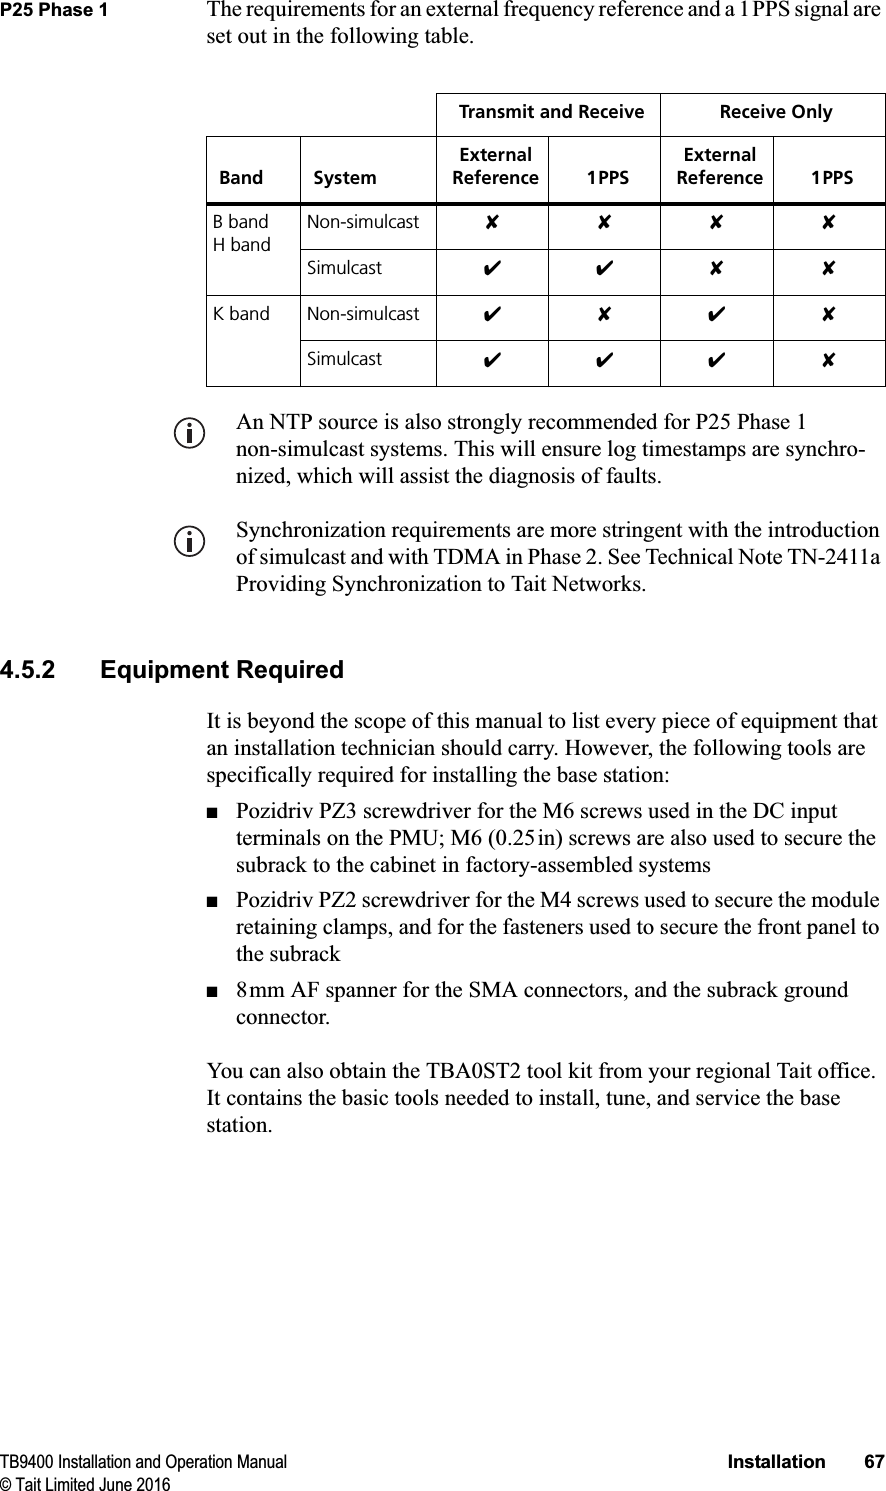 TB9400 Installation and Operation Manual Installation 67© Tait Limited June 2016P25 Phase 1 The requirements for an external frequency reference and a 1PPS signal are set out in the following table. An NTP source is also strongly recommended for P25 Phase 1 non-simulcast systems. This will ensure log timestamps are synchro-nized, which will assist the diagnosis of faults.Synchronization requirements are more stringent with the introduction of simulcast and with TDMA in Phase 2. See Technical Note TN-2411a Providing Synchronization to Tait Networks.4.5.2 Equipment RequiredIt is beyond the scope of this manual to list every piece of equipment that an installation technician should carry. However, the following tools are specifically required for installing the base station:■Pozidriv PZ3 screwdriver for the M6 screws used in the DC input terminals on the PMU; M6 (0.25in) screws are also used to secure the subrack to the cabinet in factory-assembled systems■Pozidriv PZ2 screwdriver for the M4 screws used to secure the module retaining clamps, and for the fasteners used to secure the front panel to the subrack■8mm AF spanner for the SMA connectors, and the subrack ground connector.You can also obtain the TBA0ST2 tool kit from your regional Tait office. It contains the basic tools needed to install, tune, and service the base station.Transmit and Receive Receive OnlyBand SystemExternal Reference 1PPSExternal Reference 1PPSB bandH bandNon-simulcast ✘✘✘✘Simulcast ✔✔✘ ✘K band Non-simulcast ✔✘✔✘Simulcast ✔✔✔✘